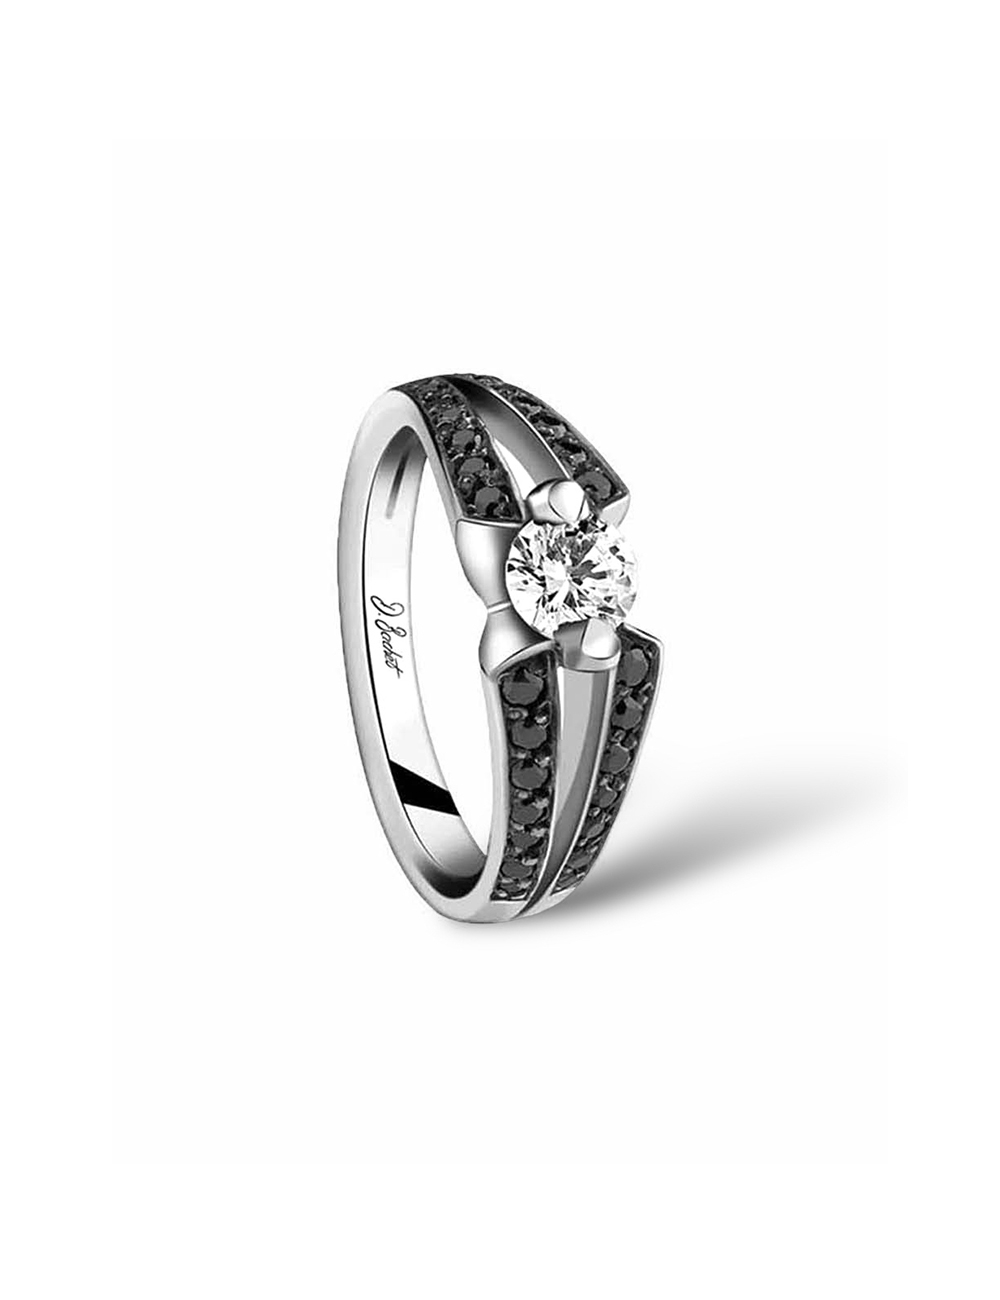 Engagement ring set with a 0.50 ct white diamond on a modern platinum band adorned with black diamonds.